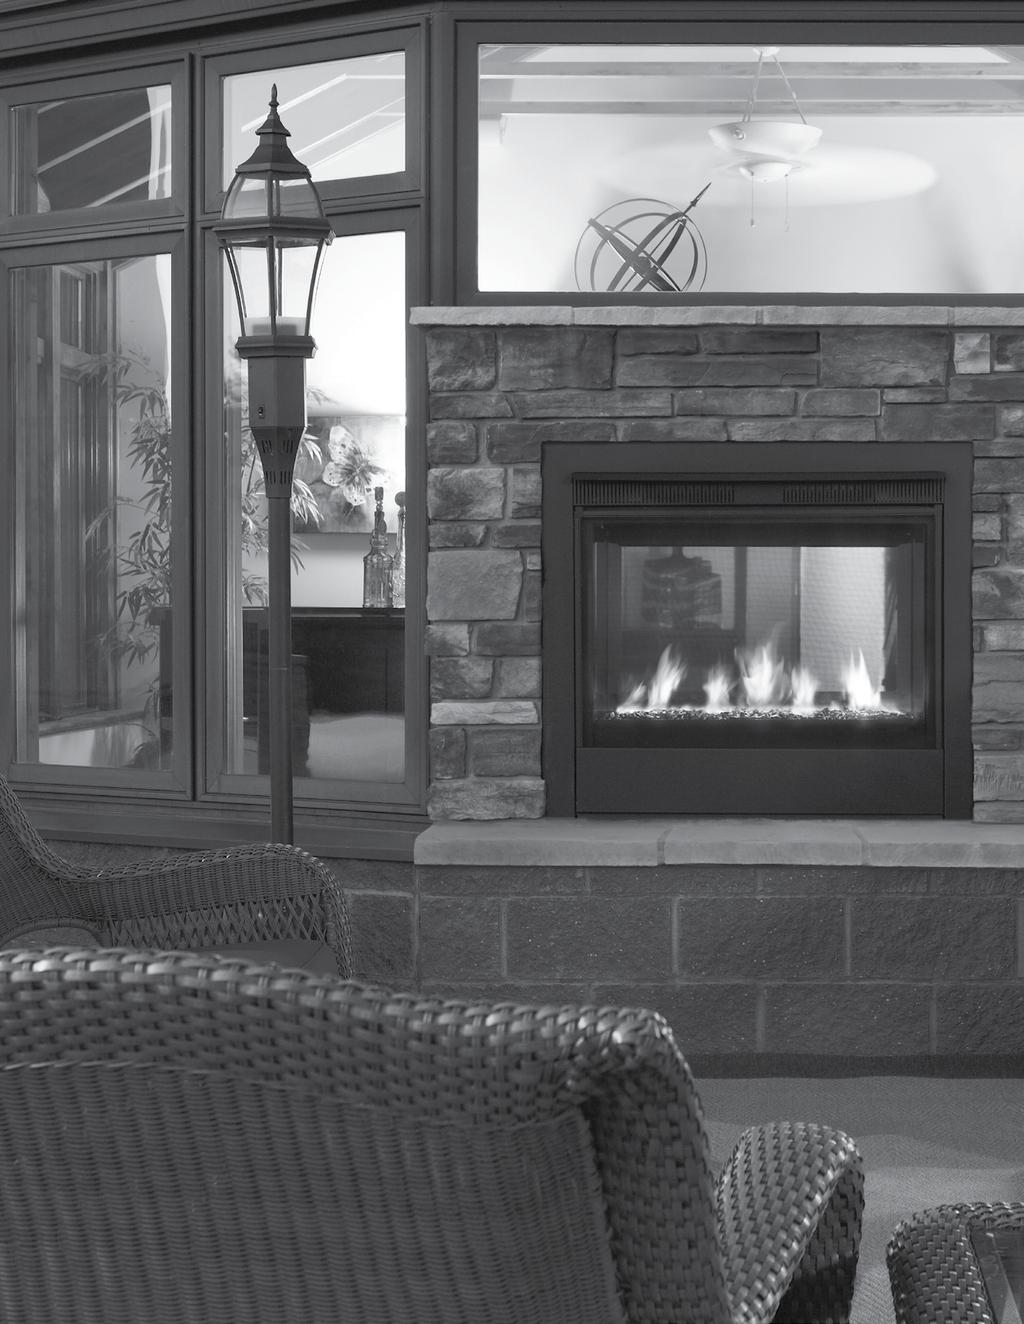 Living rooms aren't what they used to be. Outdoor Lifestyles by Hearth & Home Technologies discards the stale notion that a "living space" is only contained within the walls of your home.